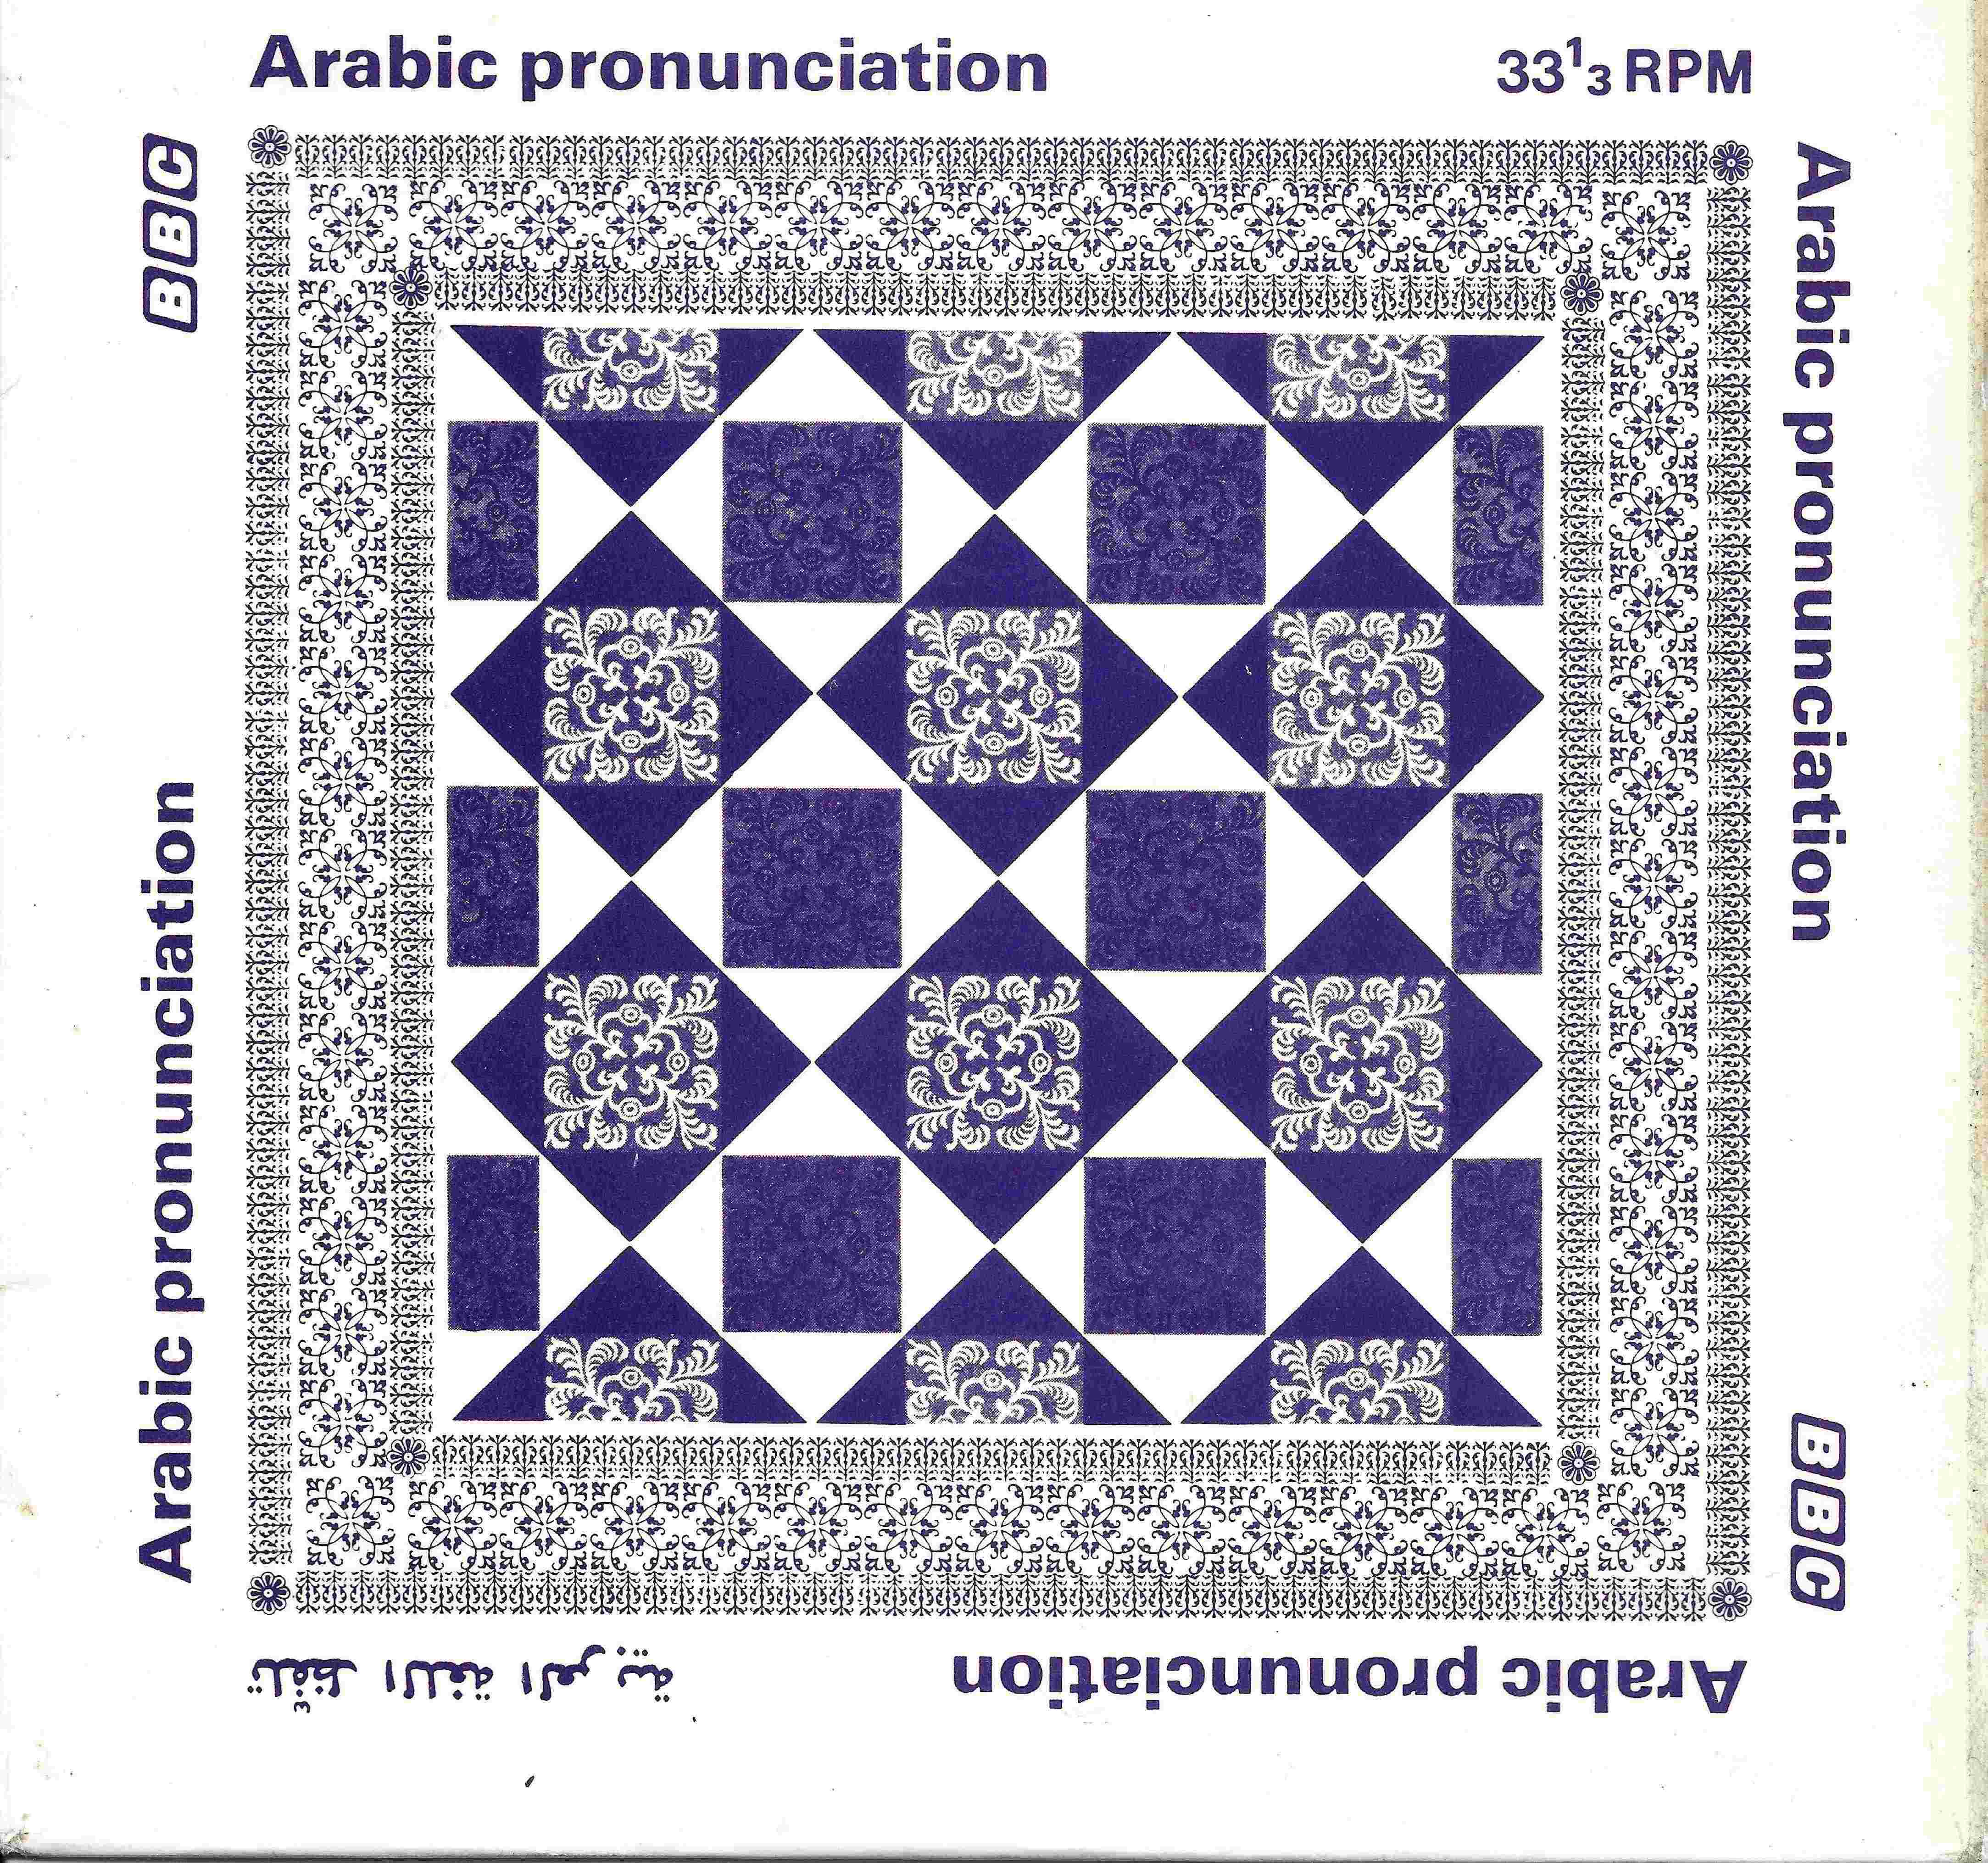 Picture of OP 171/172 Arabic pronunciation - Includes booklet by artist T. F. Mitchell from the BBC singles - Records and Tapes library